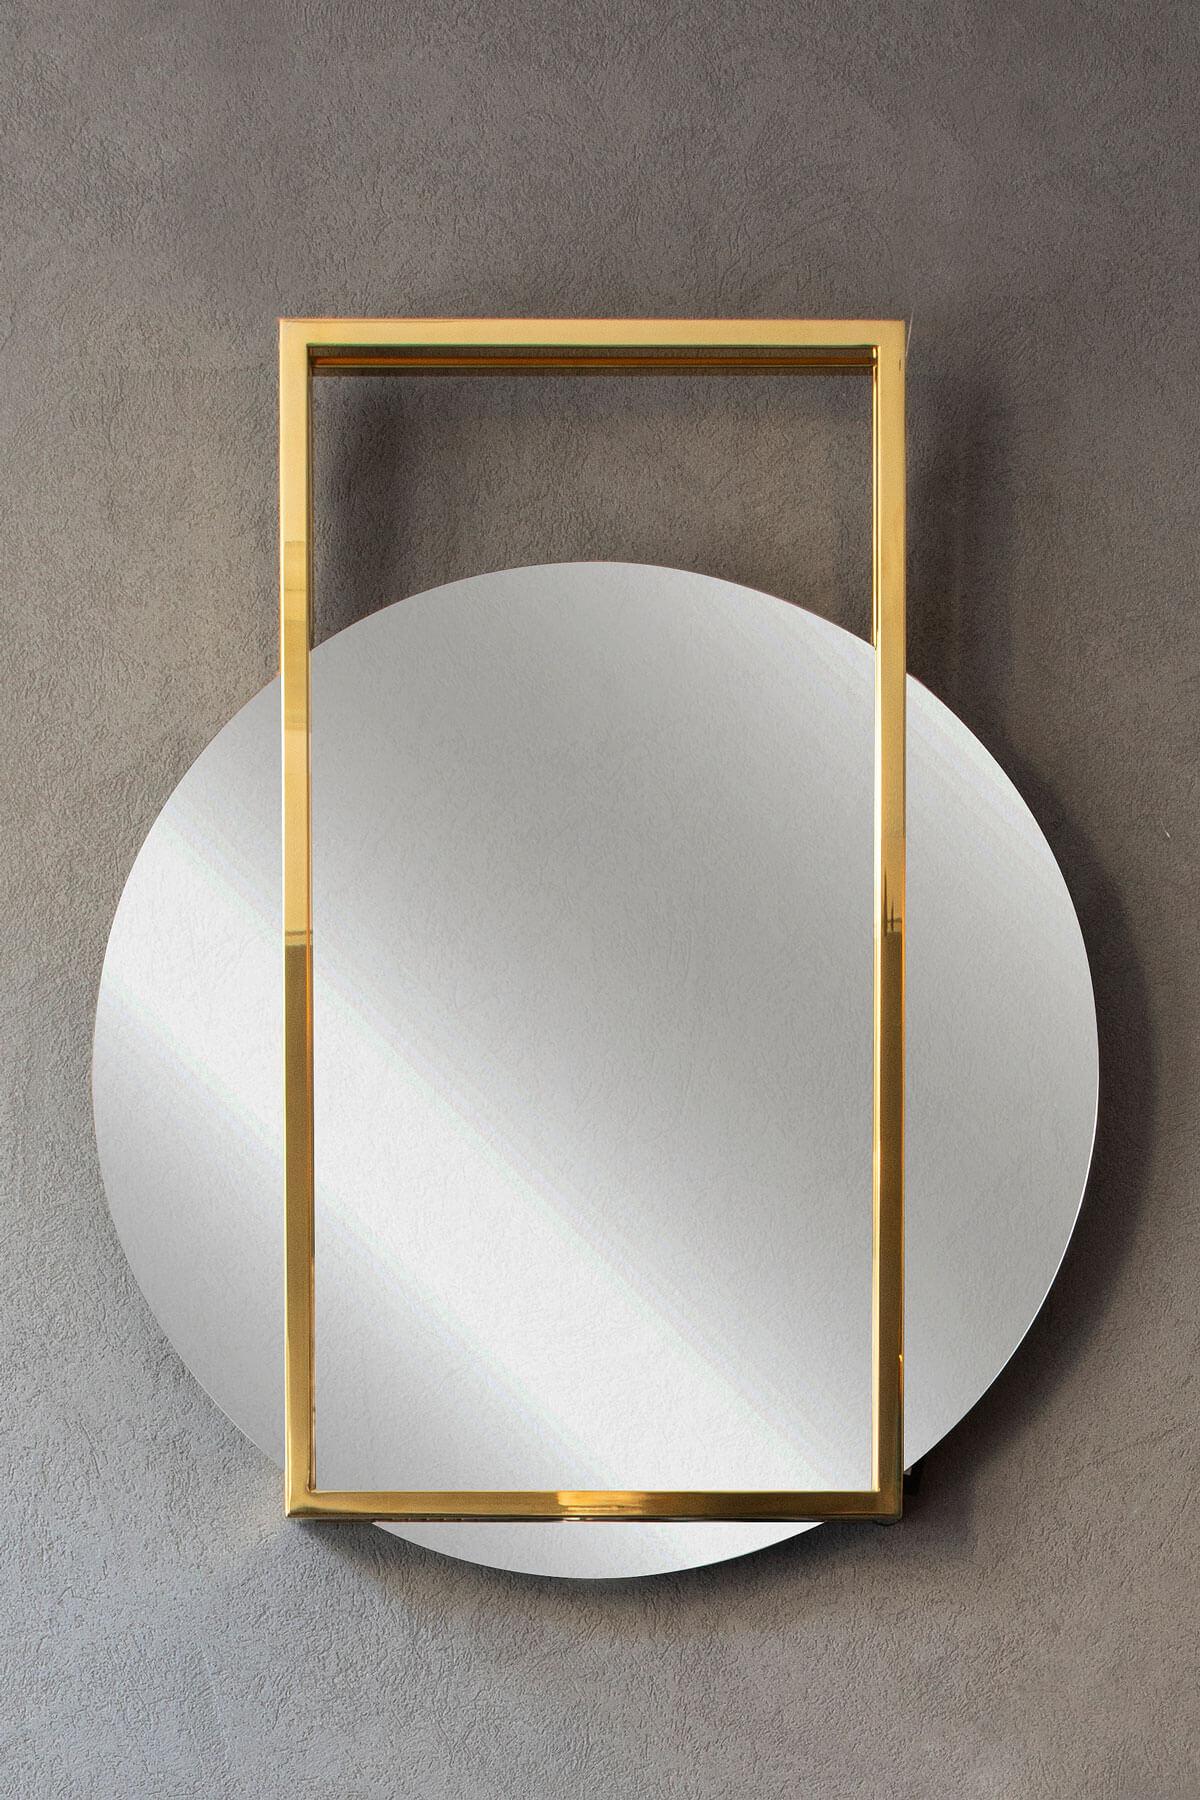 Famed mirror, which will be the favorite of geometry lovers, exhibits an aesthetic stance with its elegant and minimal design. The mirror, which can be used in harmony with the Famed console, is one of the shining options of the collection as a